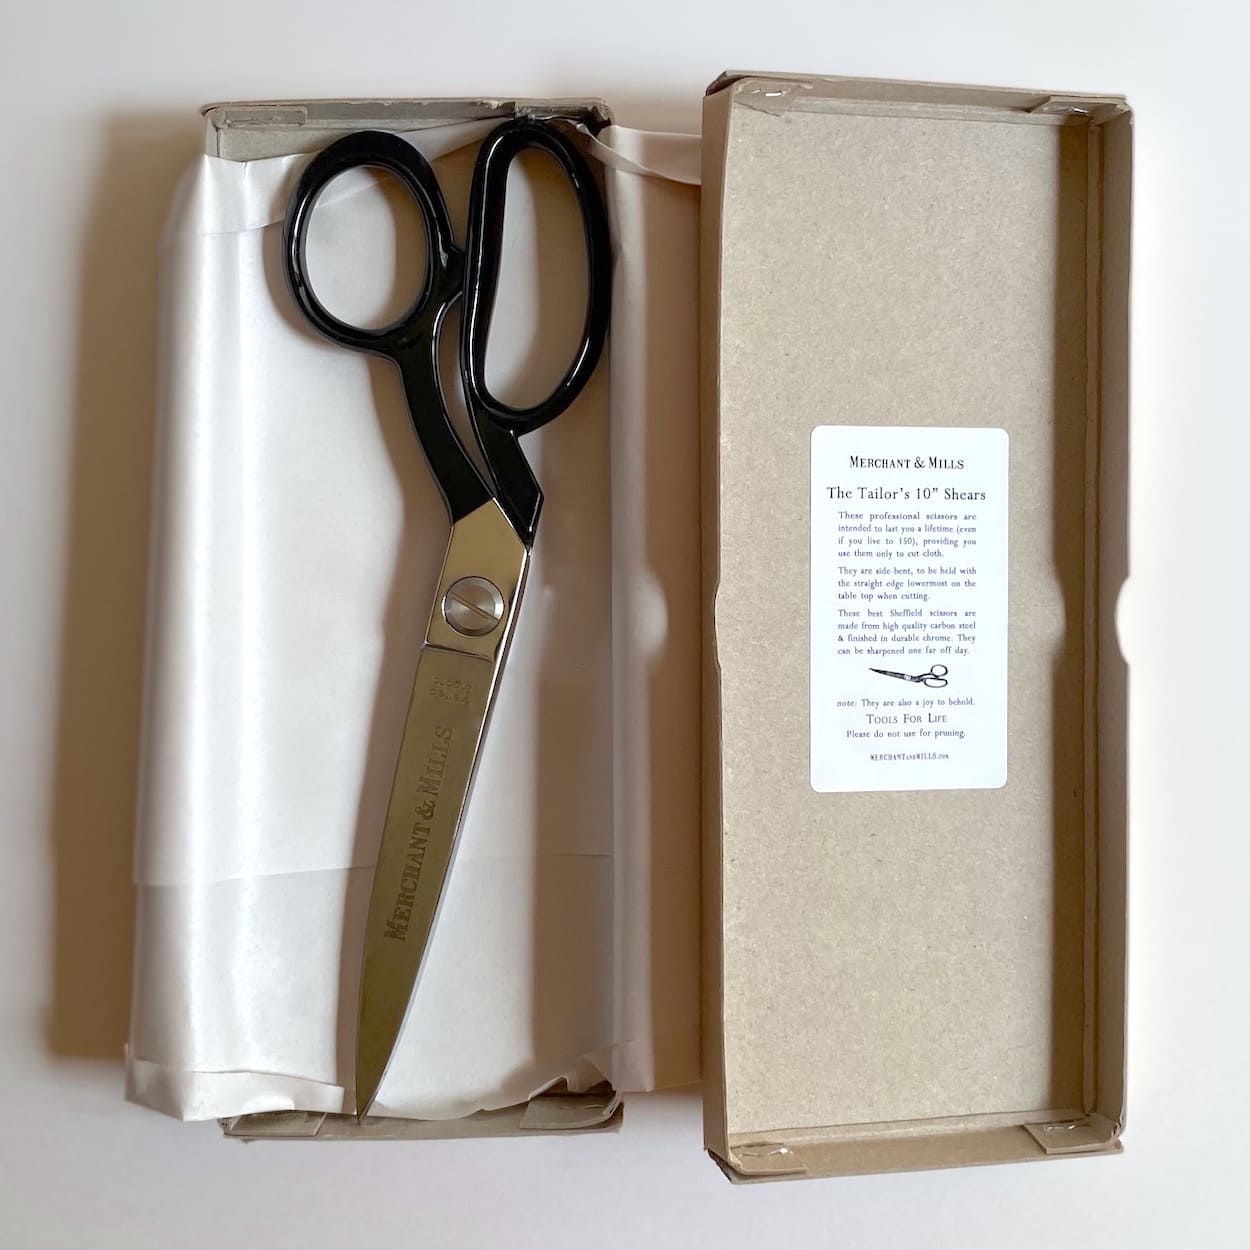 Sidebent Tailor's Shears - Ten Inch